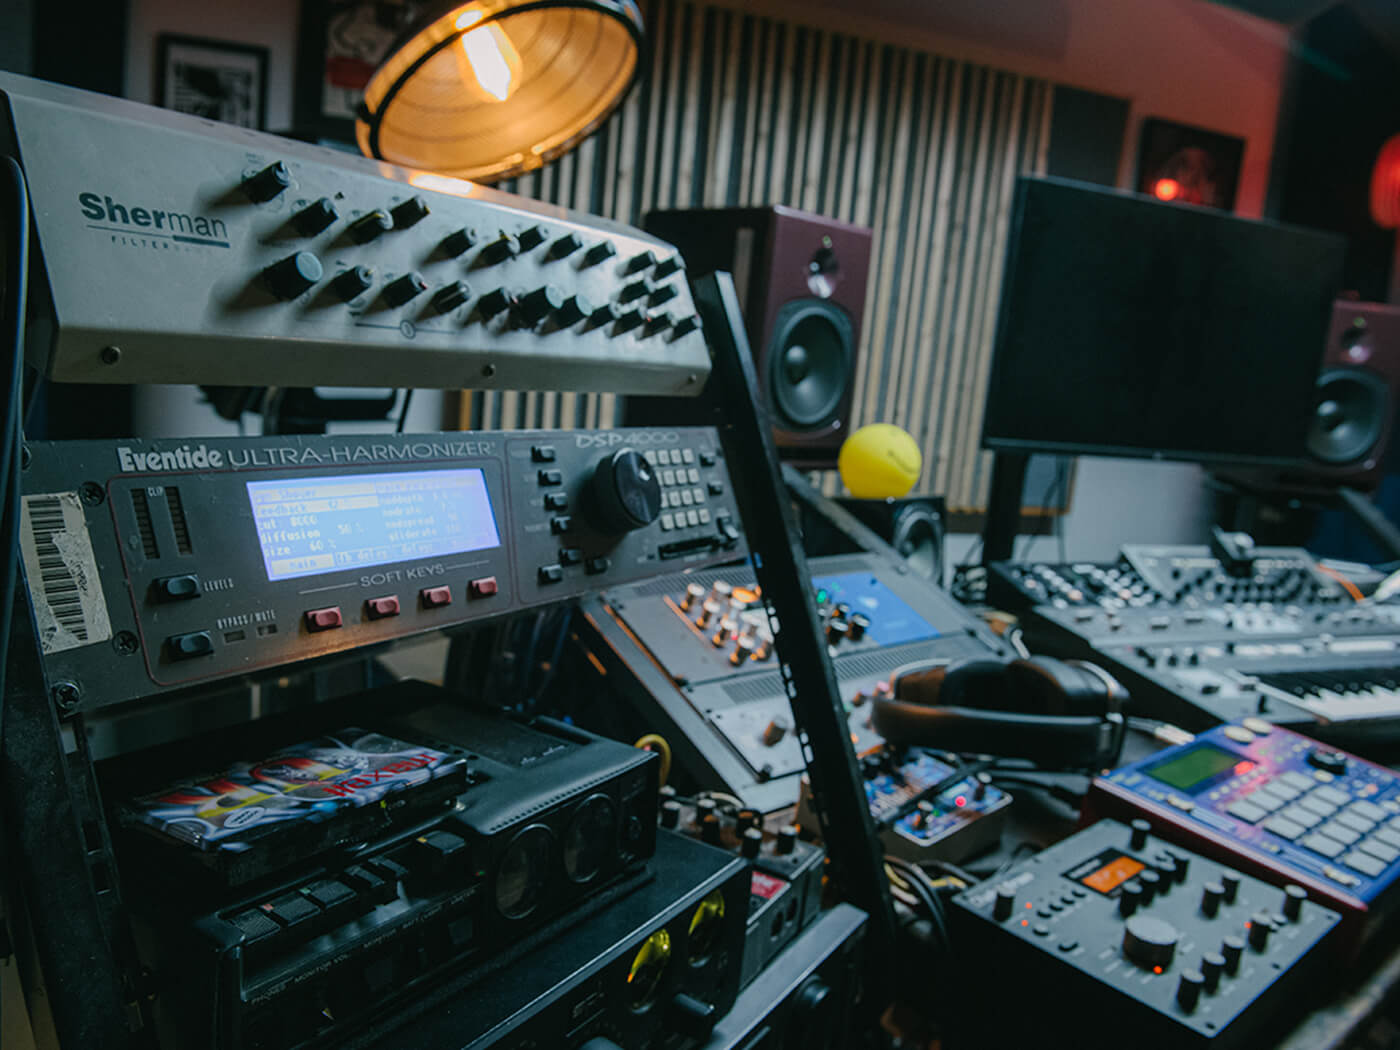 The Eventide DSP 4000 alongside other gear in the studio Voigtmann uses, photo by @Ginnypa